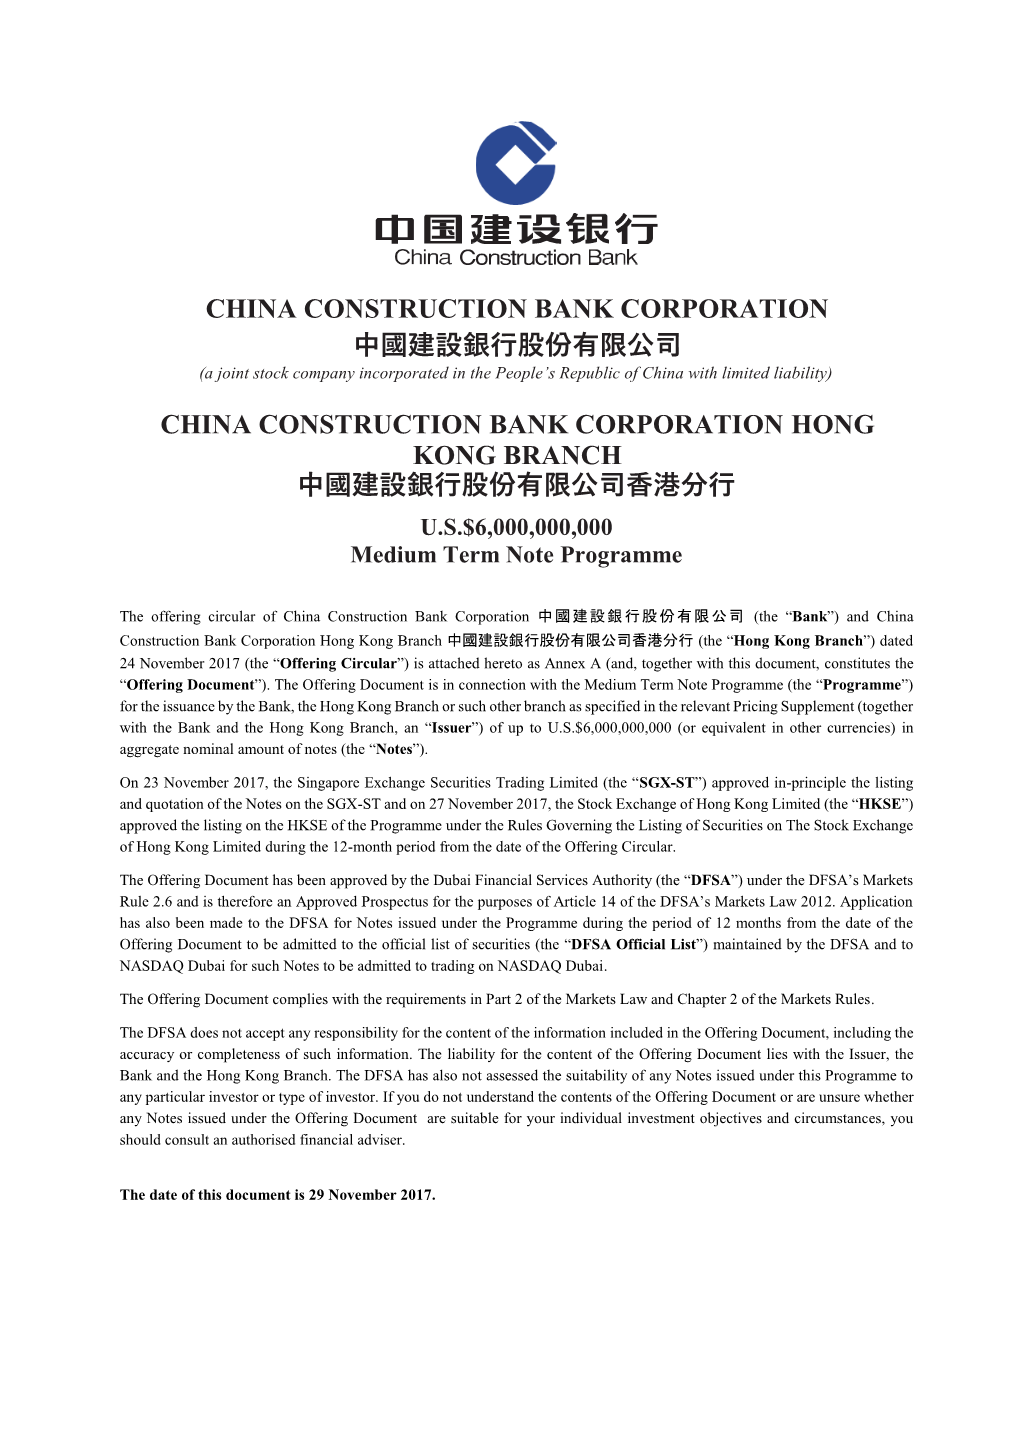 CHINA CONSTRUCTION BANK CORPORATION 中國建設銀行股份有限公司 (A Joint Stock Company Incorporated in the People’S Republic of China with Limited Liability)